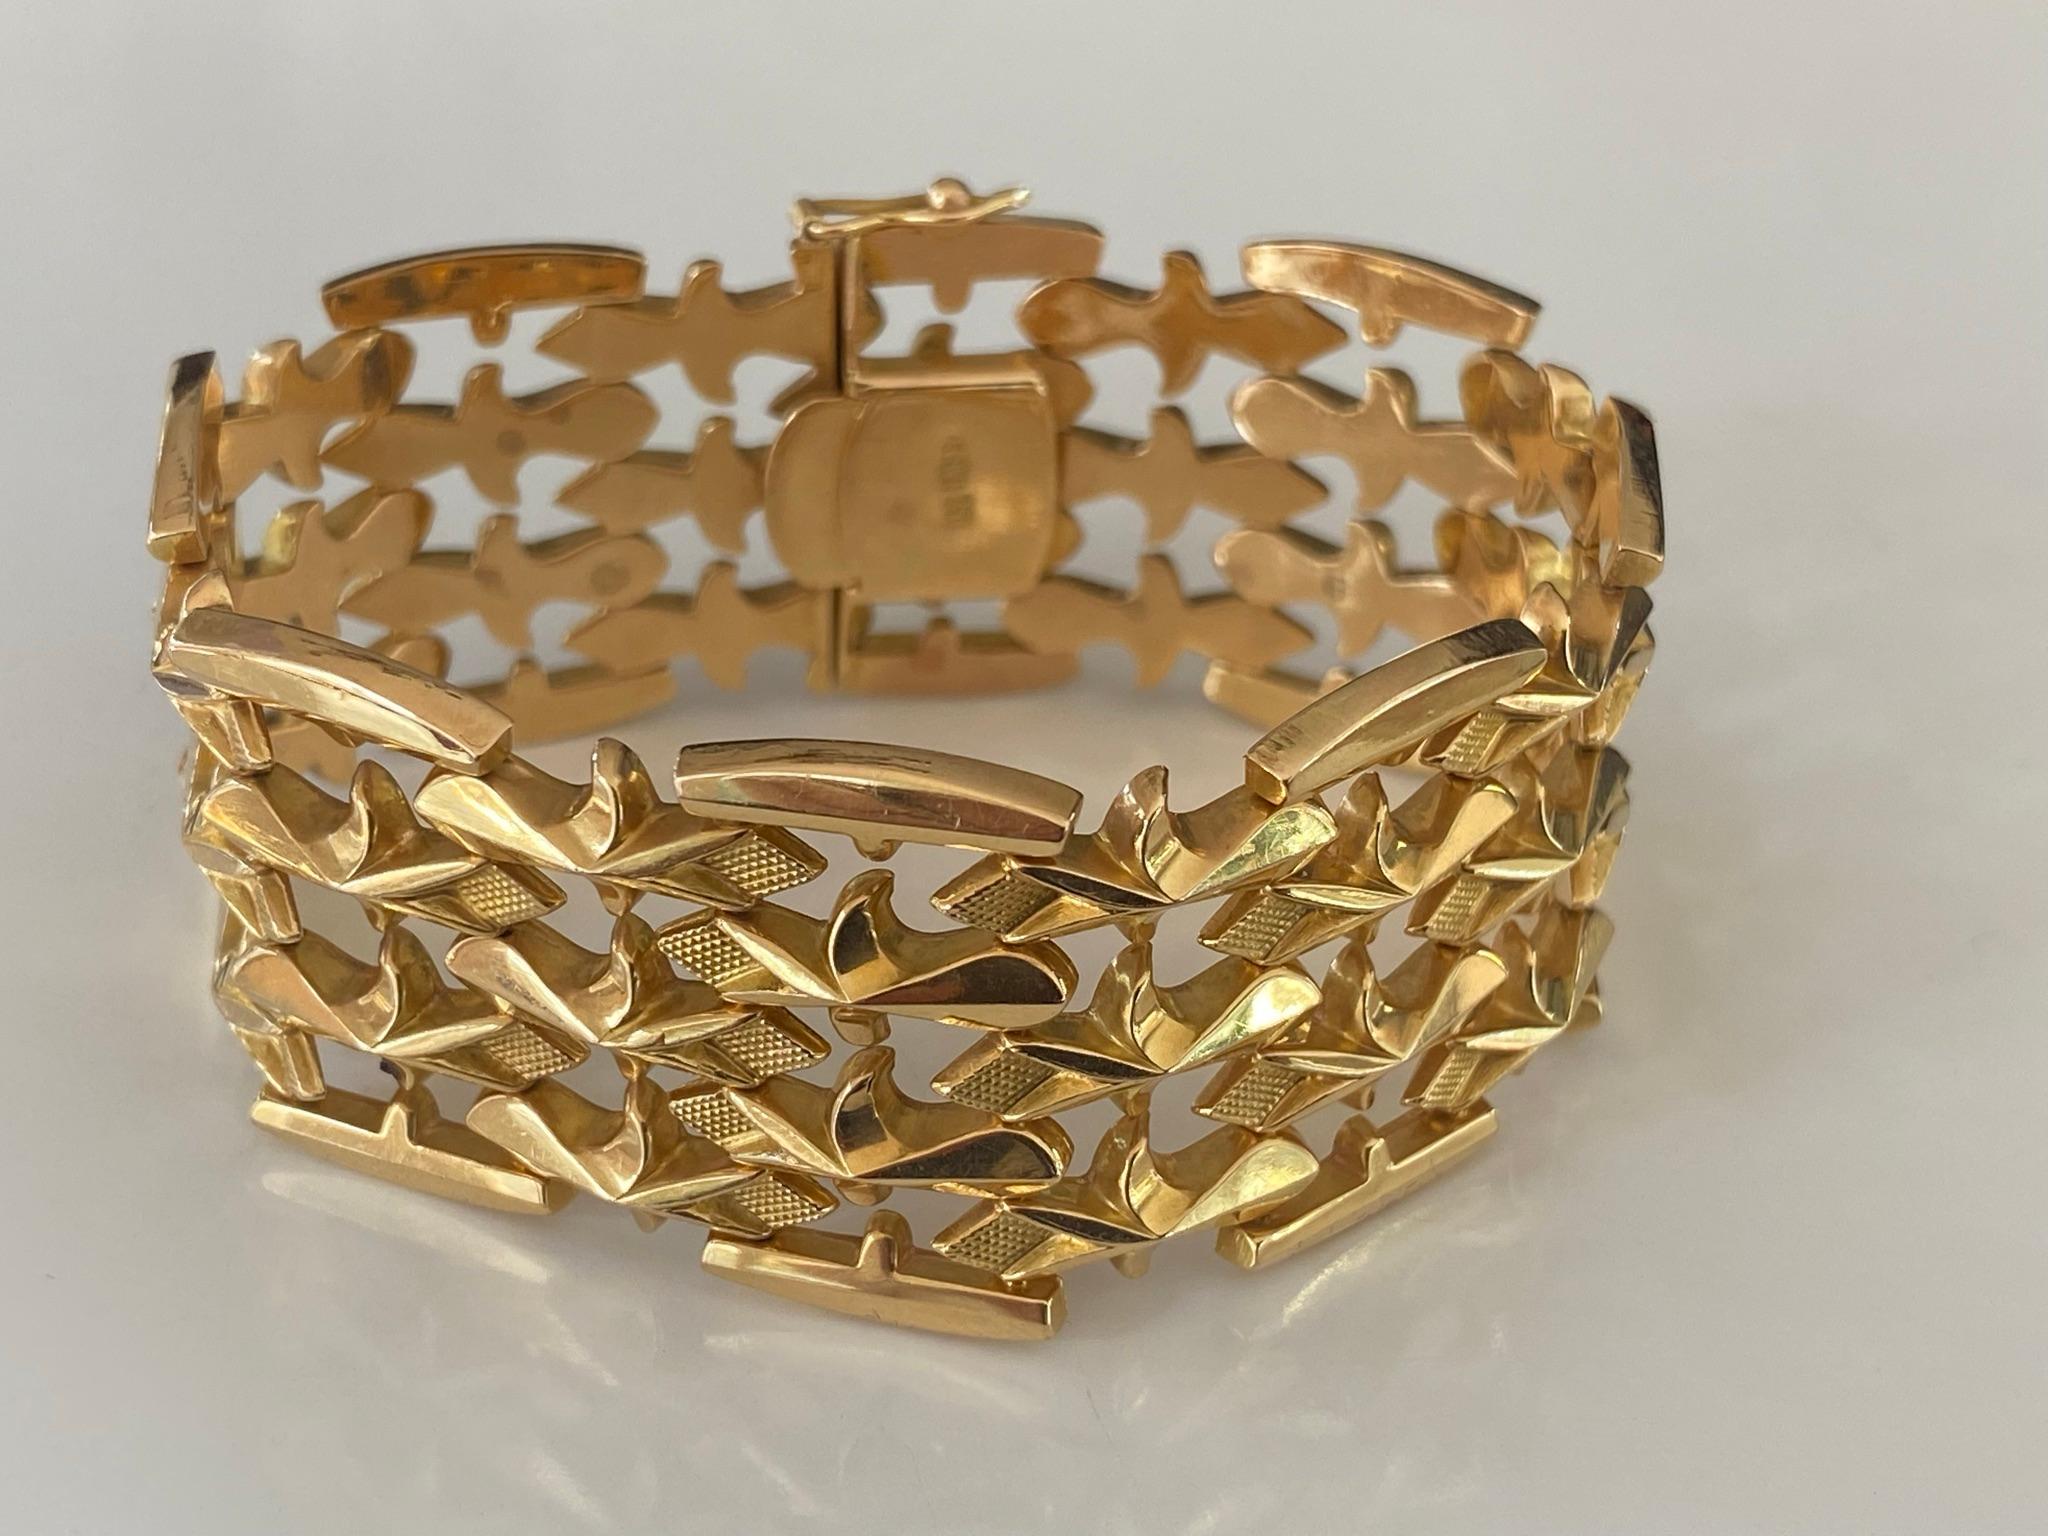 This beautiful repousse link bracelet hand crafted in 18kt yellow gold features a repeating fleur-de-lis pattern set in a four-row openwork design. Made in Italy.  The bracelet measures 6.85 inches and 1.15 inches (26mm) wide. 


